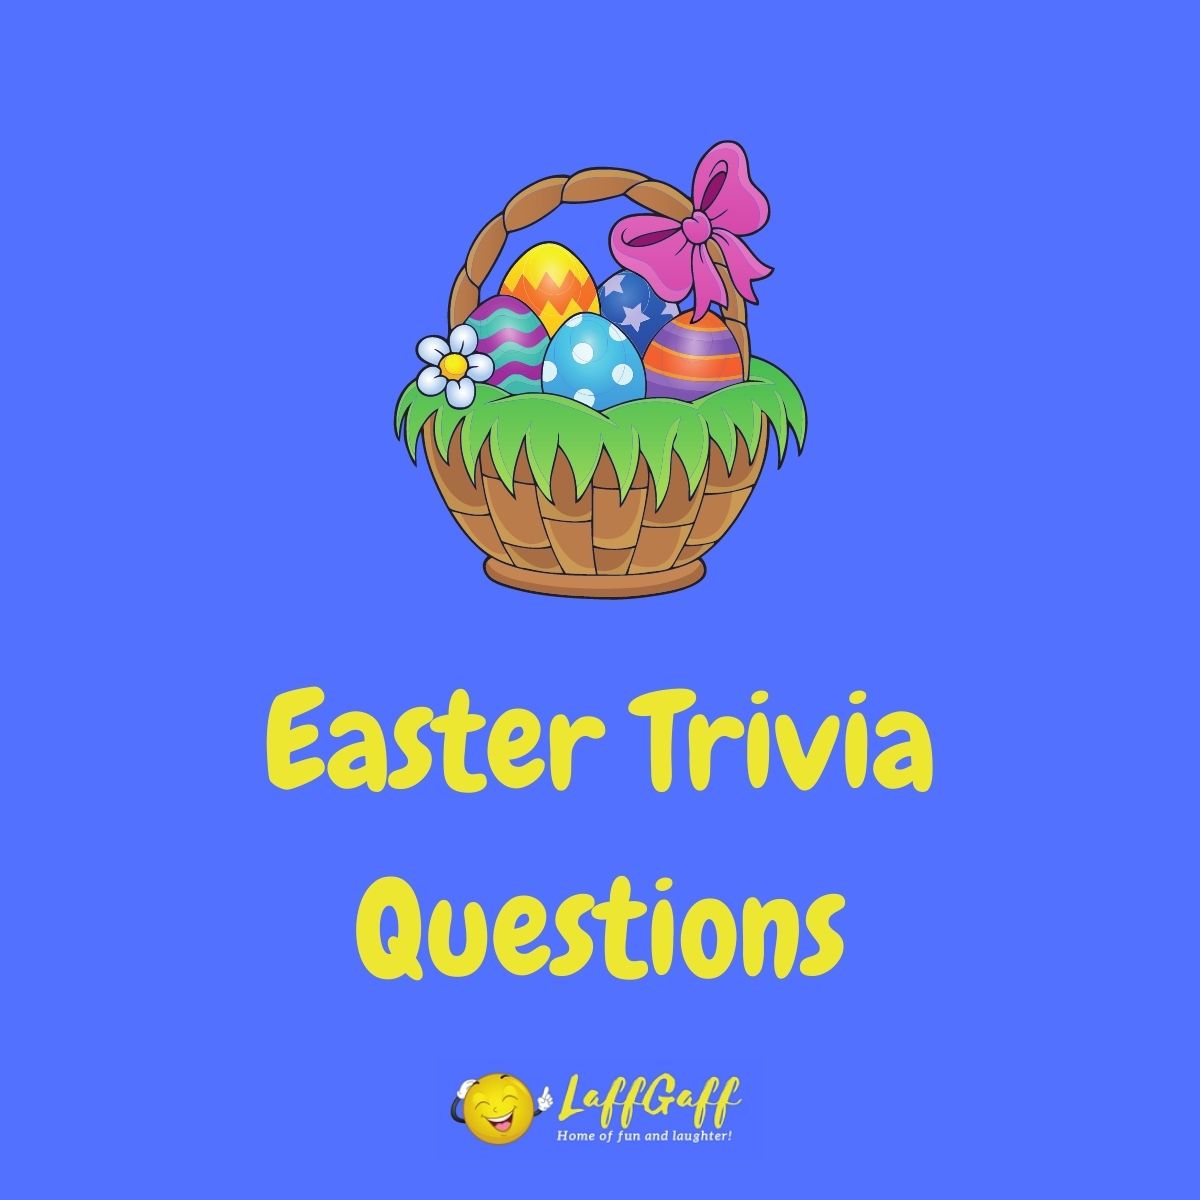 22 Fun Free Easter Trivia Questions And Answers!